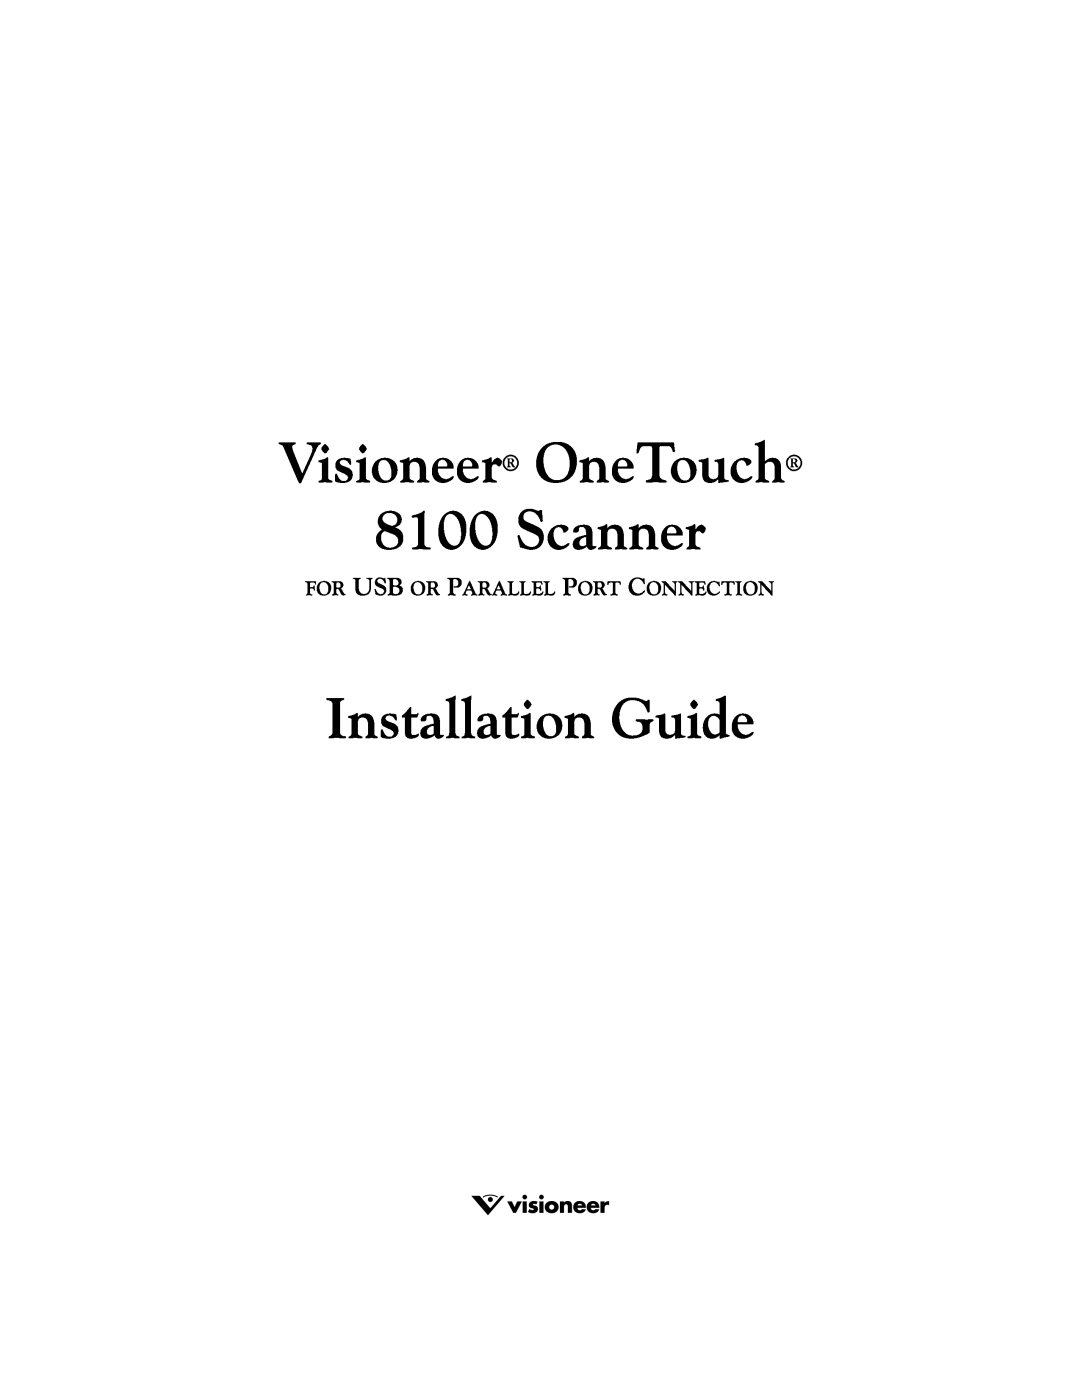 Visioneer manual Visioneer OneTouch 8100 Scanner, Installation Guide, For Usb Or Parallel Port Connection 